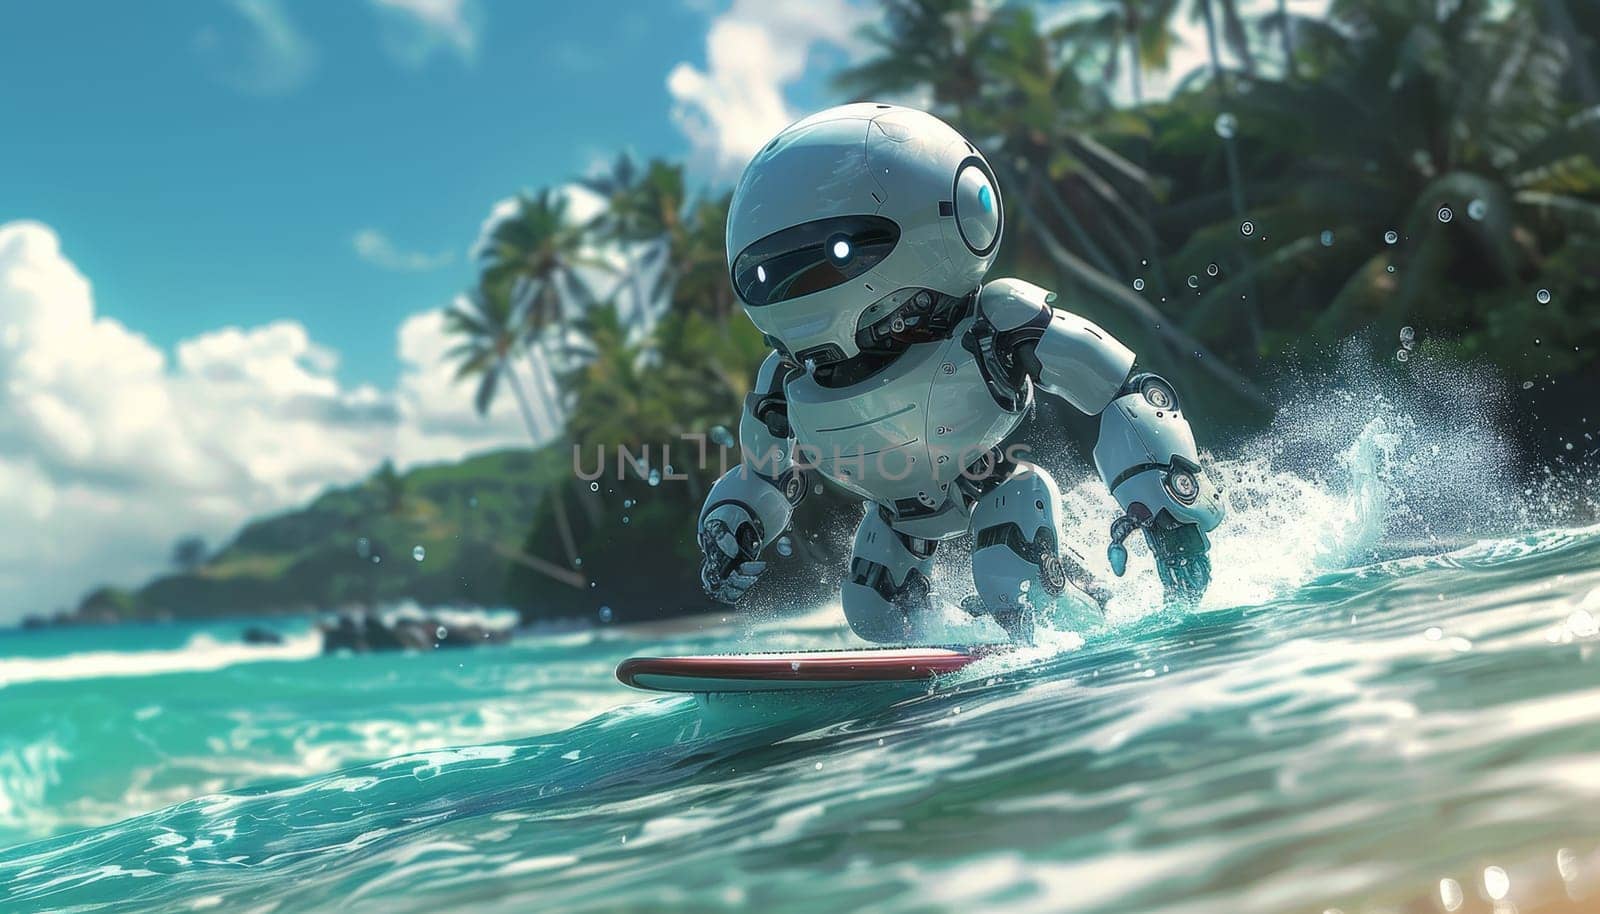 A robot is surfing on a surfboard in the ocean by AI generated image.